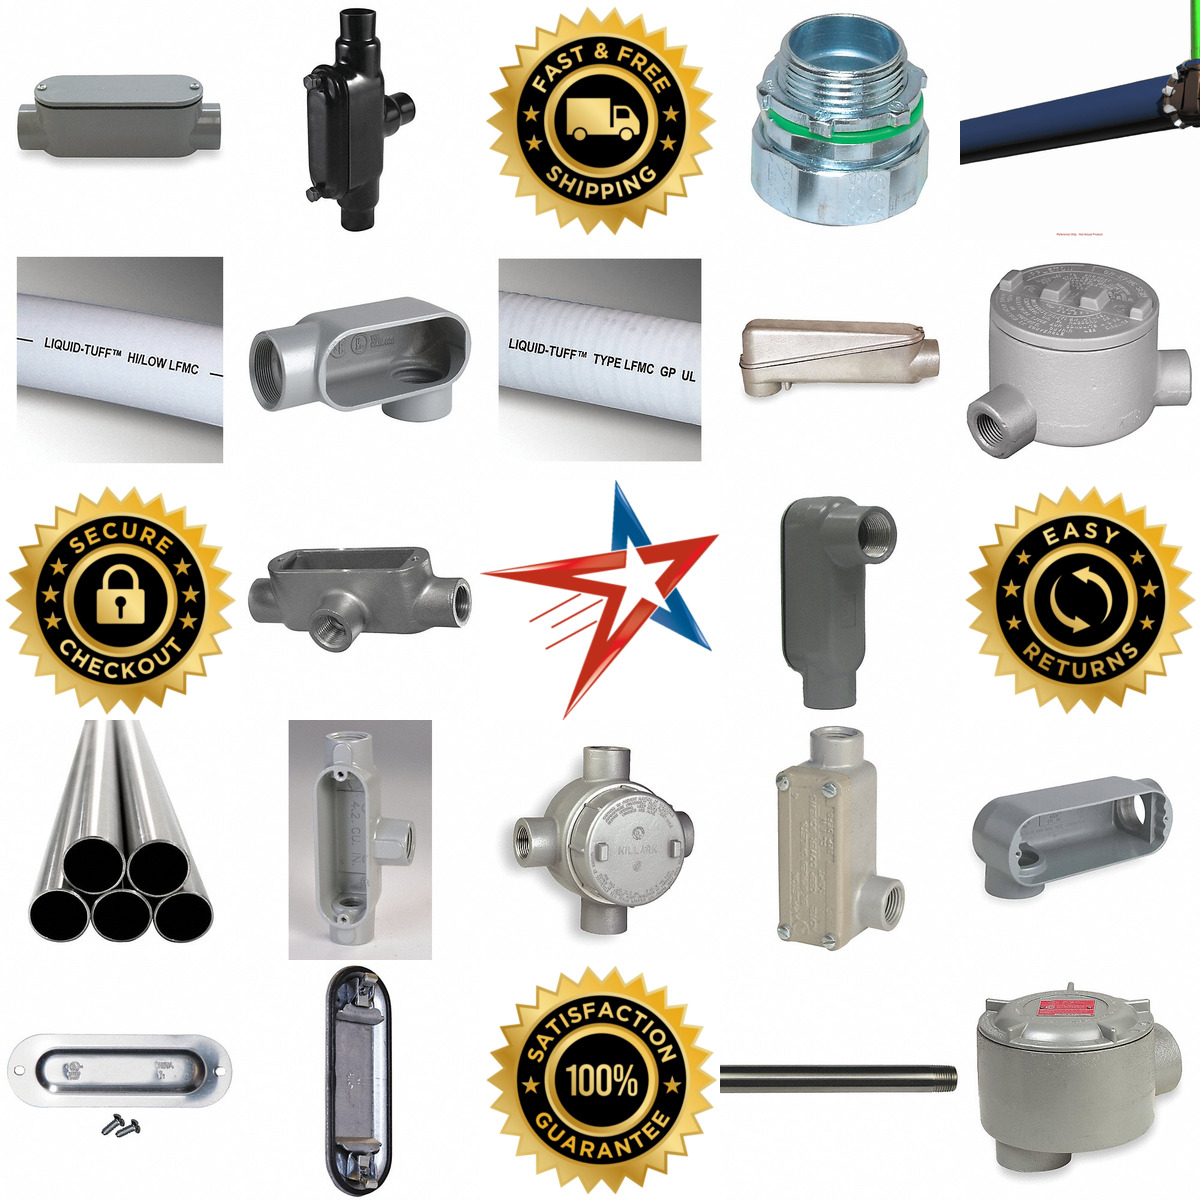 A selection of Conduit products on GoVets